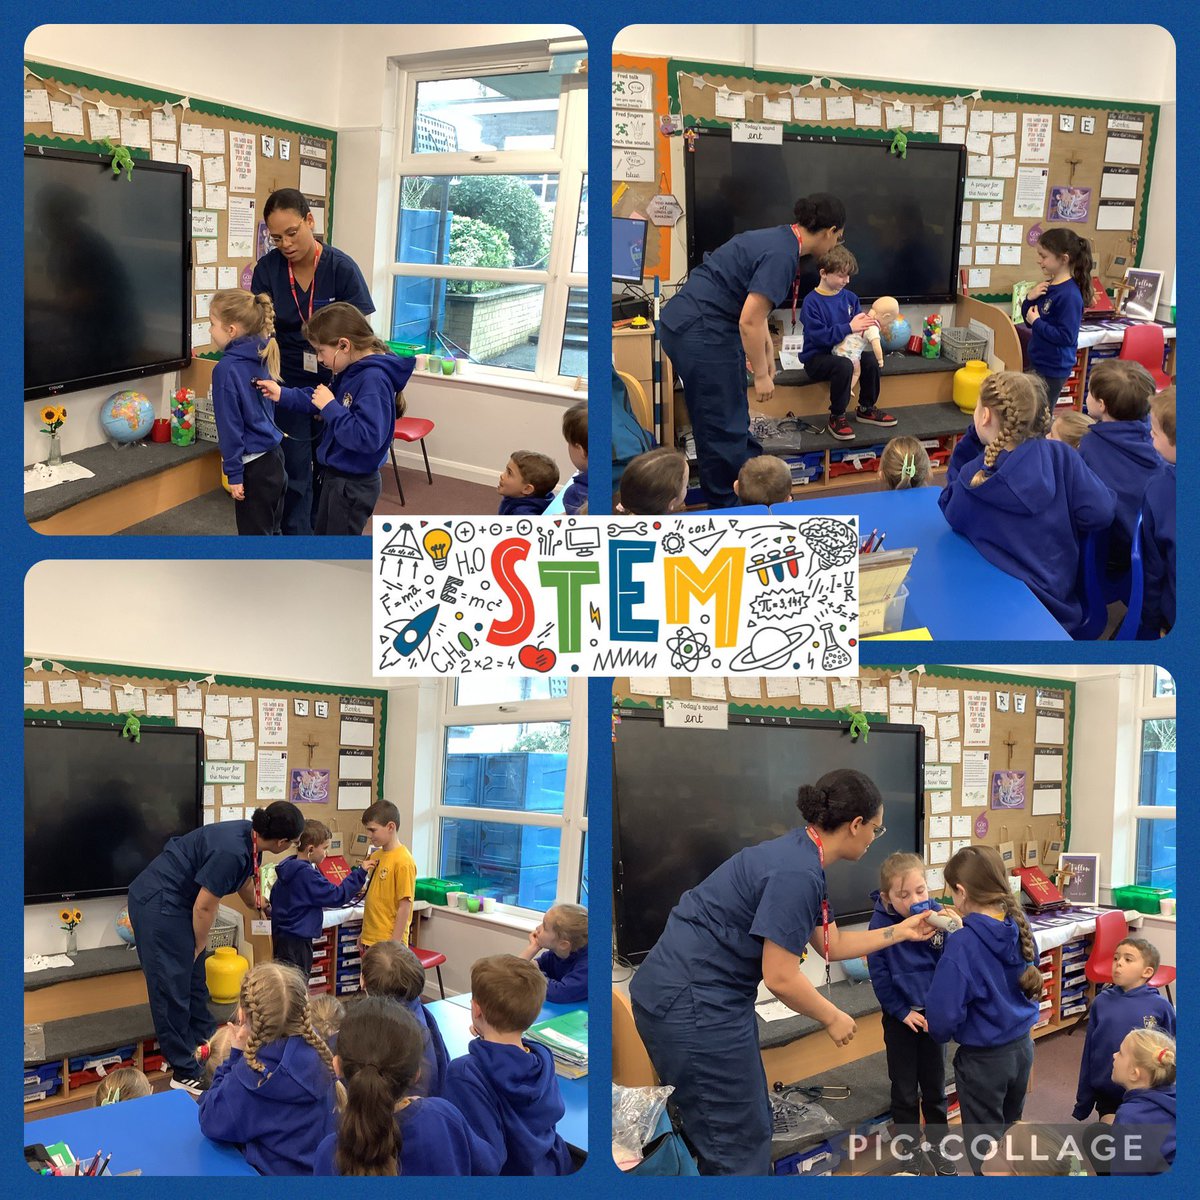 Year 2 were fascinated to learn all about the daily role of a paediatrician. We acted out some real-life cases, listened to advice about keeping healthy and asked lots of questions to find out about this very important job. #StMarysScientists #BritishScienceWeek